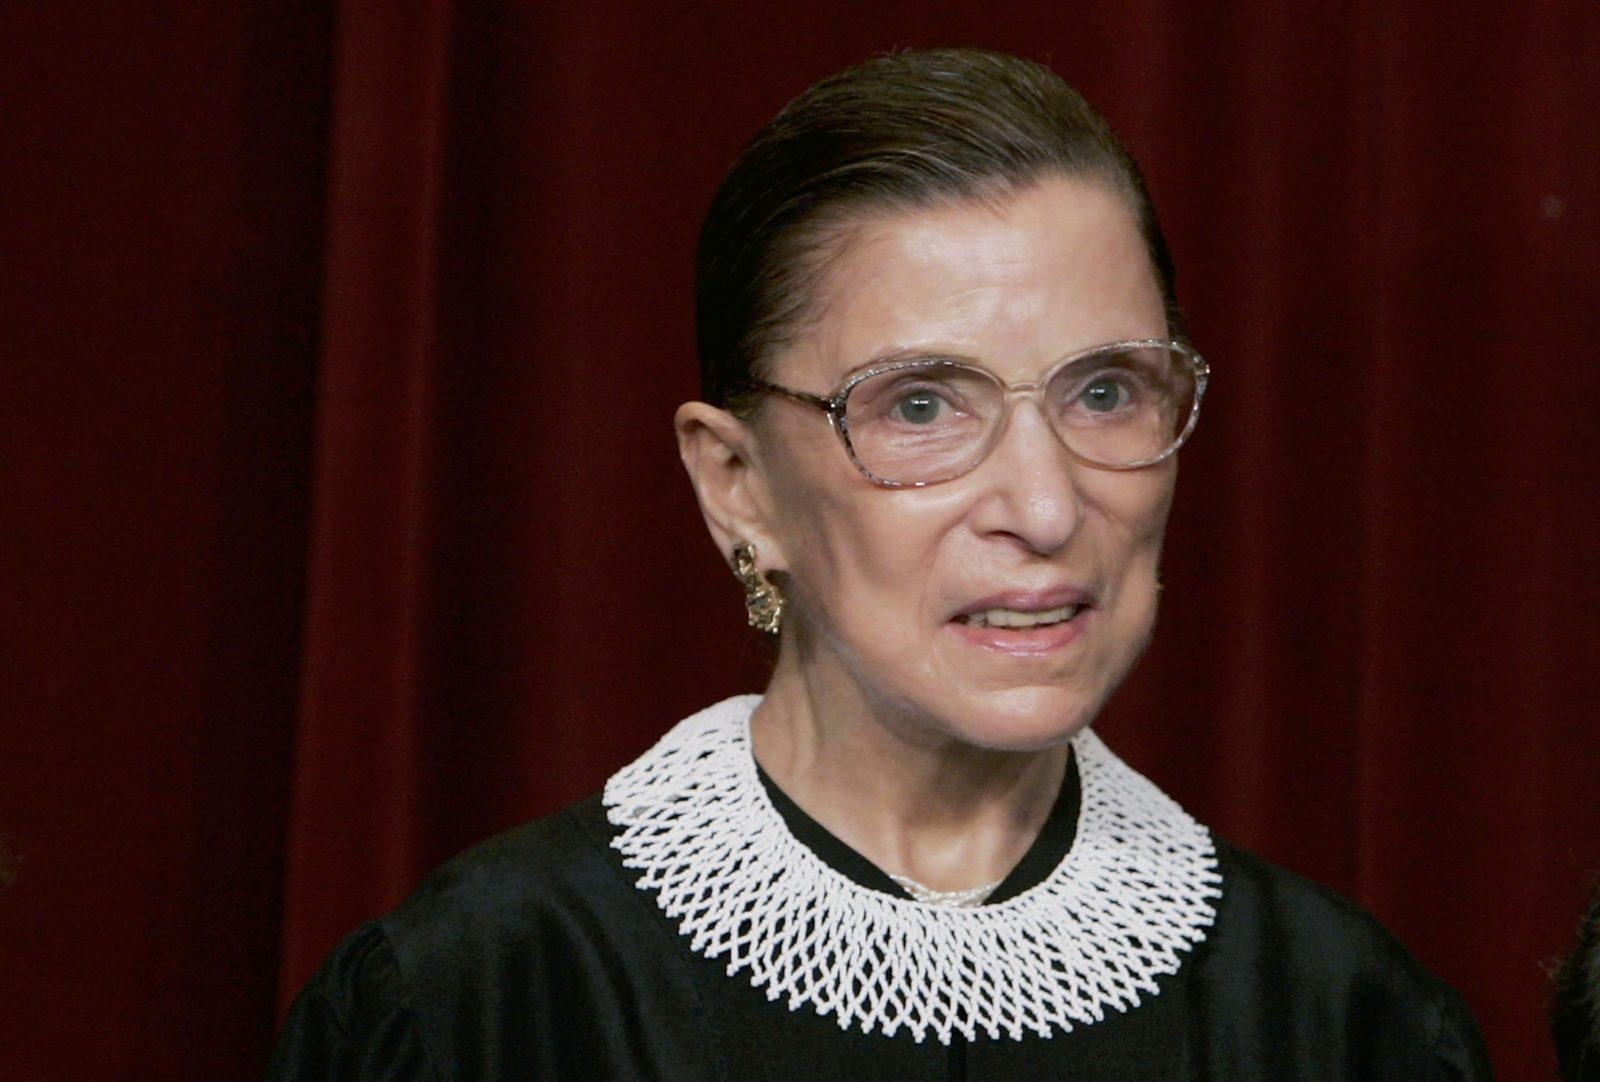 Justice Ruth Bader Ginsburg Her Life Her ‘most Fervent Wish And The